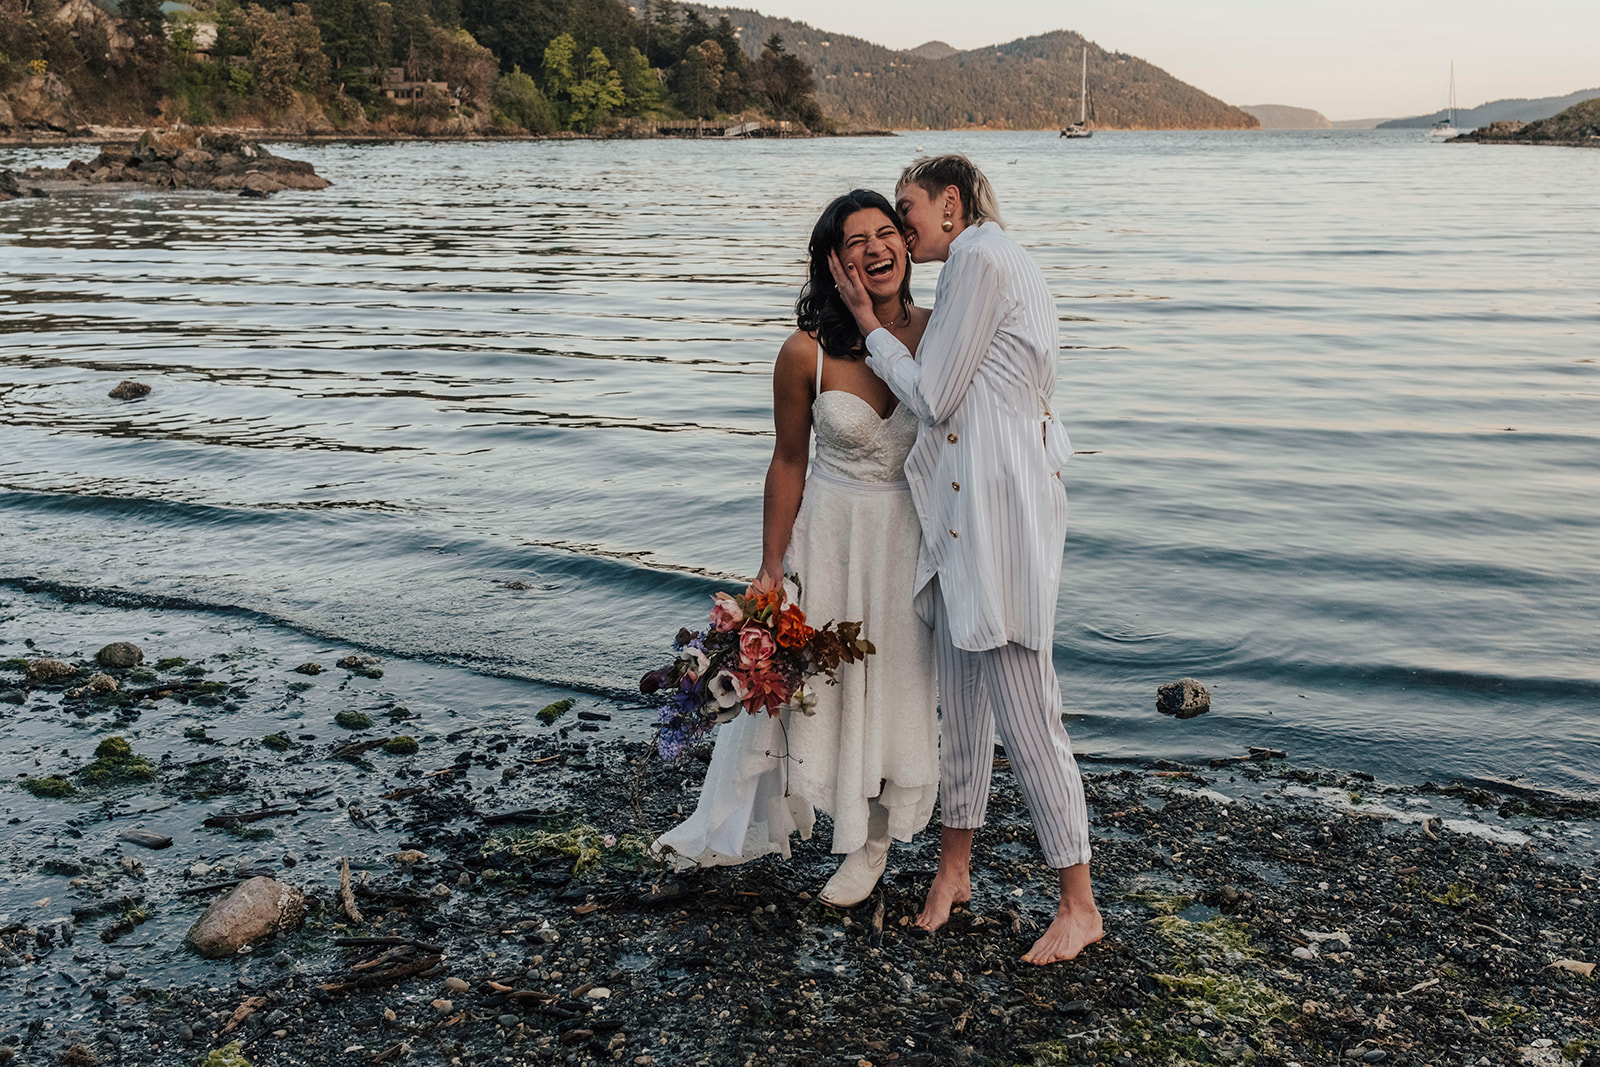 Intimate Elopement at Outlook Inn on Orcas Island. Eastsound Wedding in the San Juan Islands. Indian Island Orcas vortex